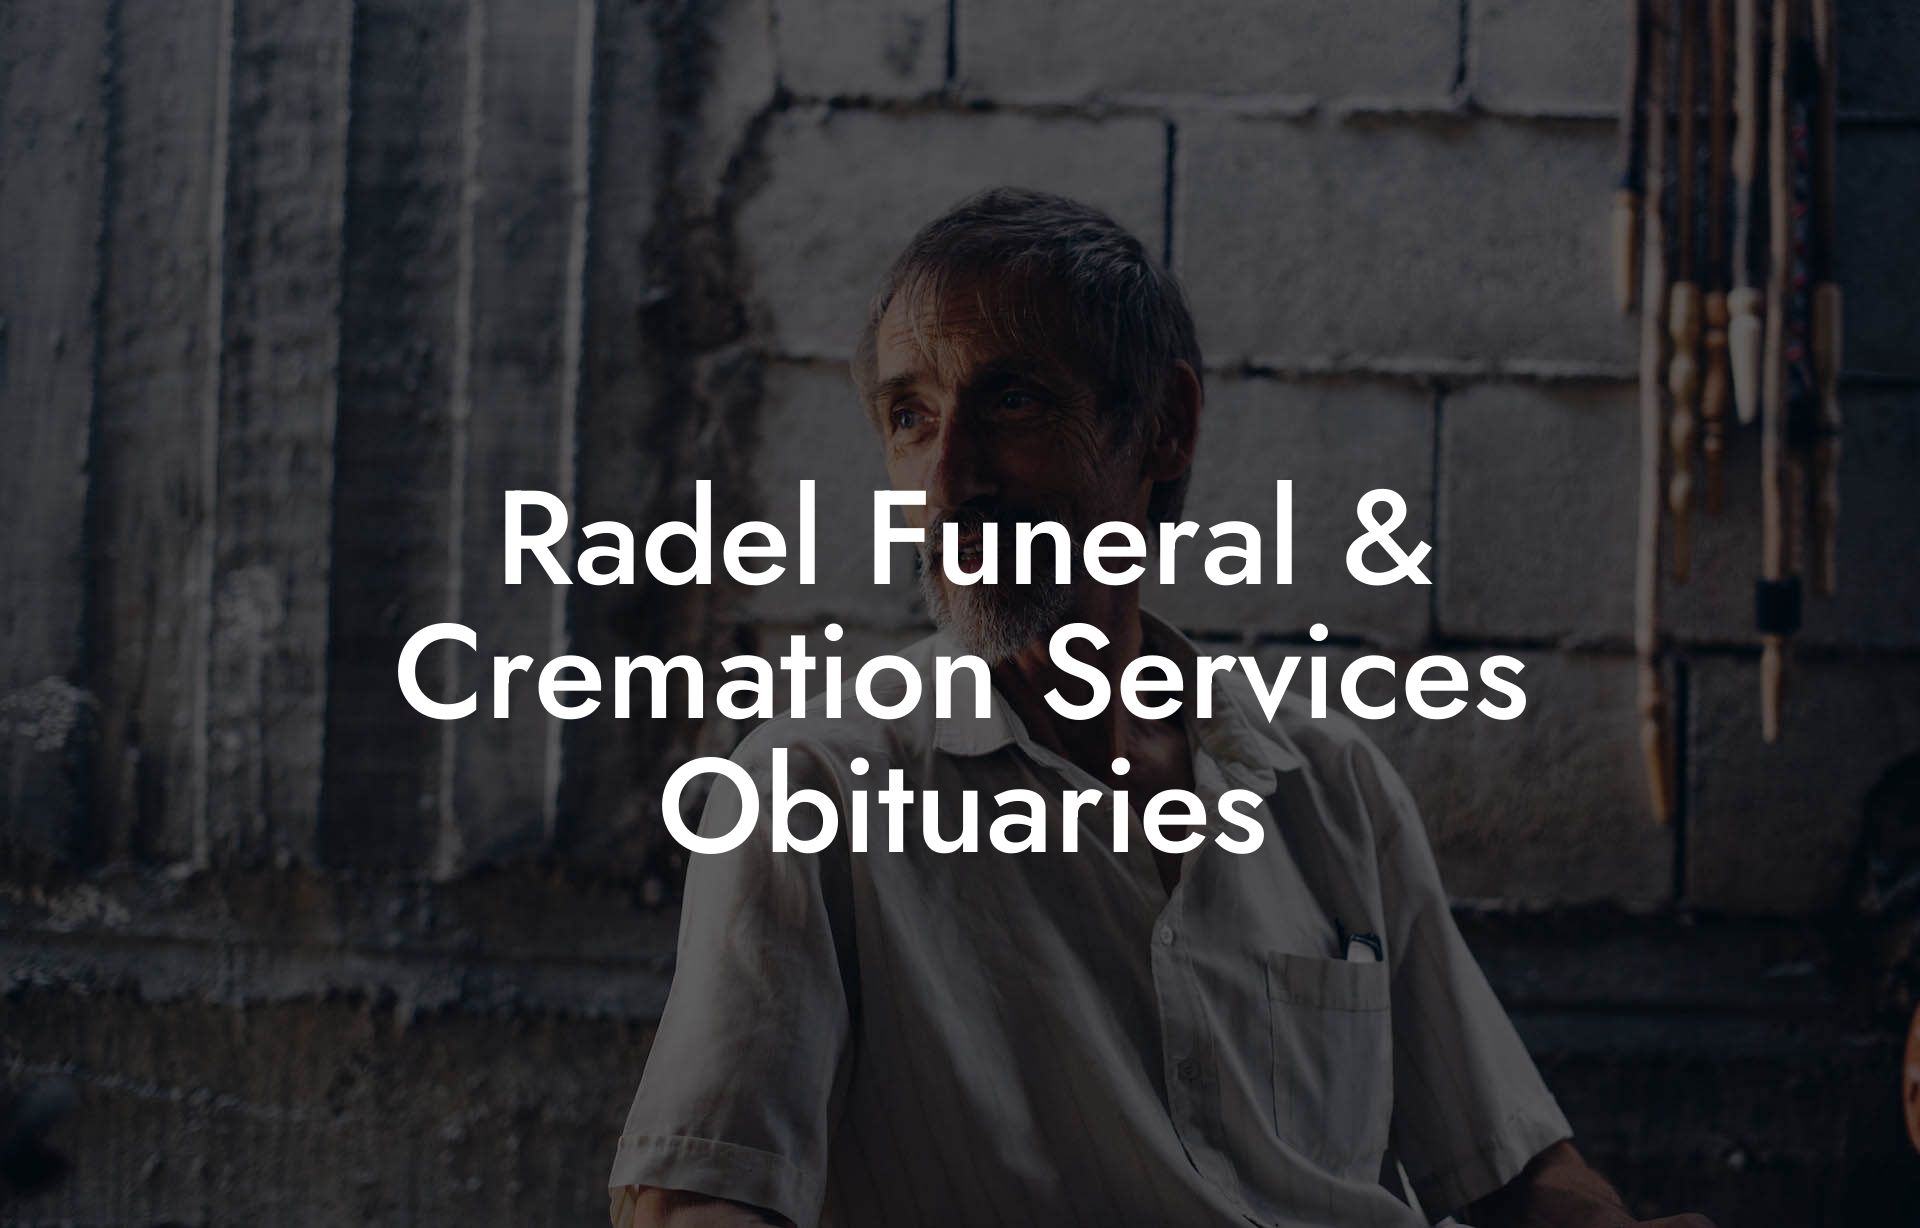 Radel Funeral & Cremation Services Obituaries